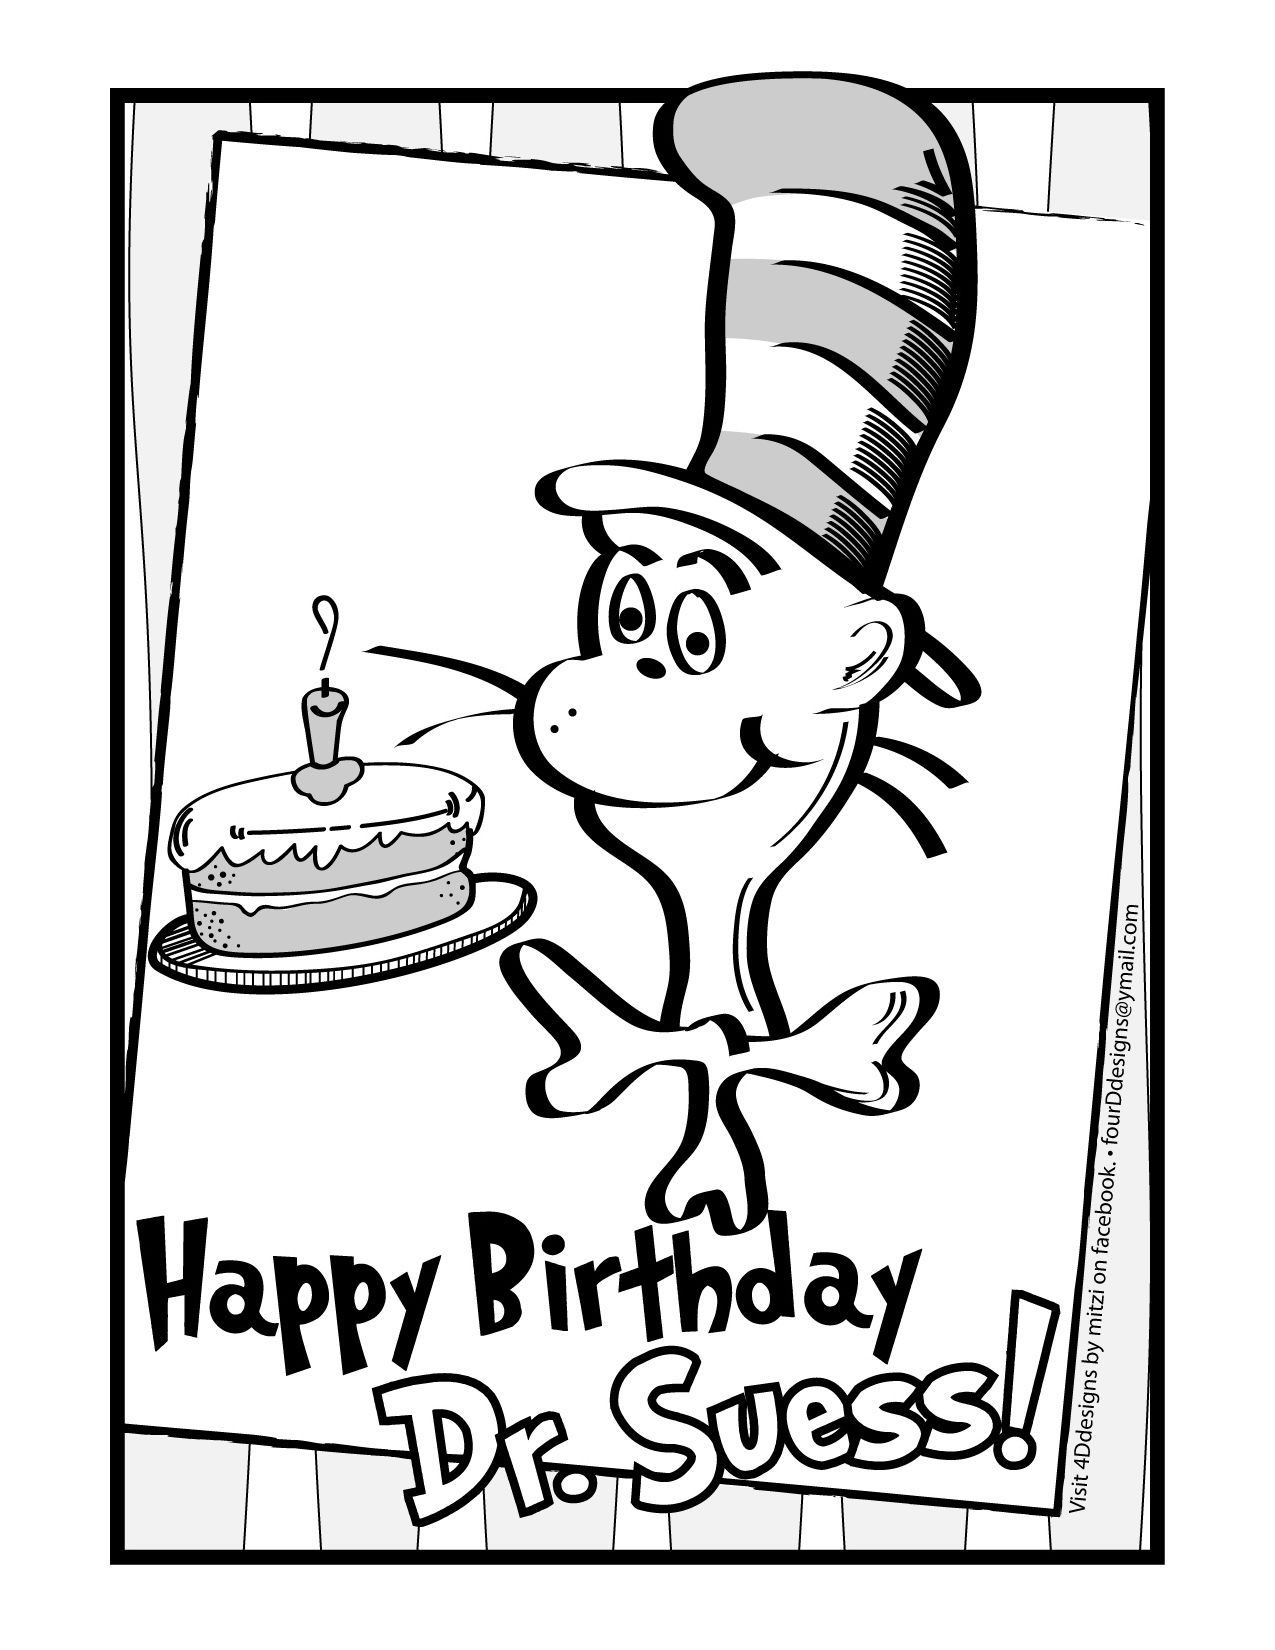 Happy birthday dr suess coloring page â free download dr seuss coloring pages dr seuss coloring sheet dr seuss birthday